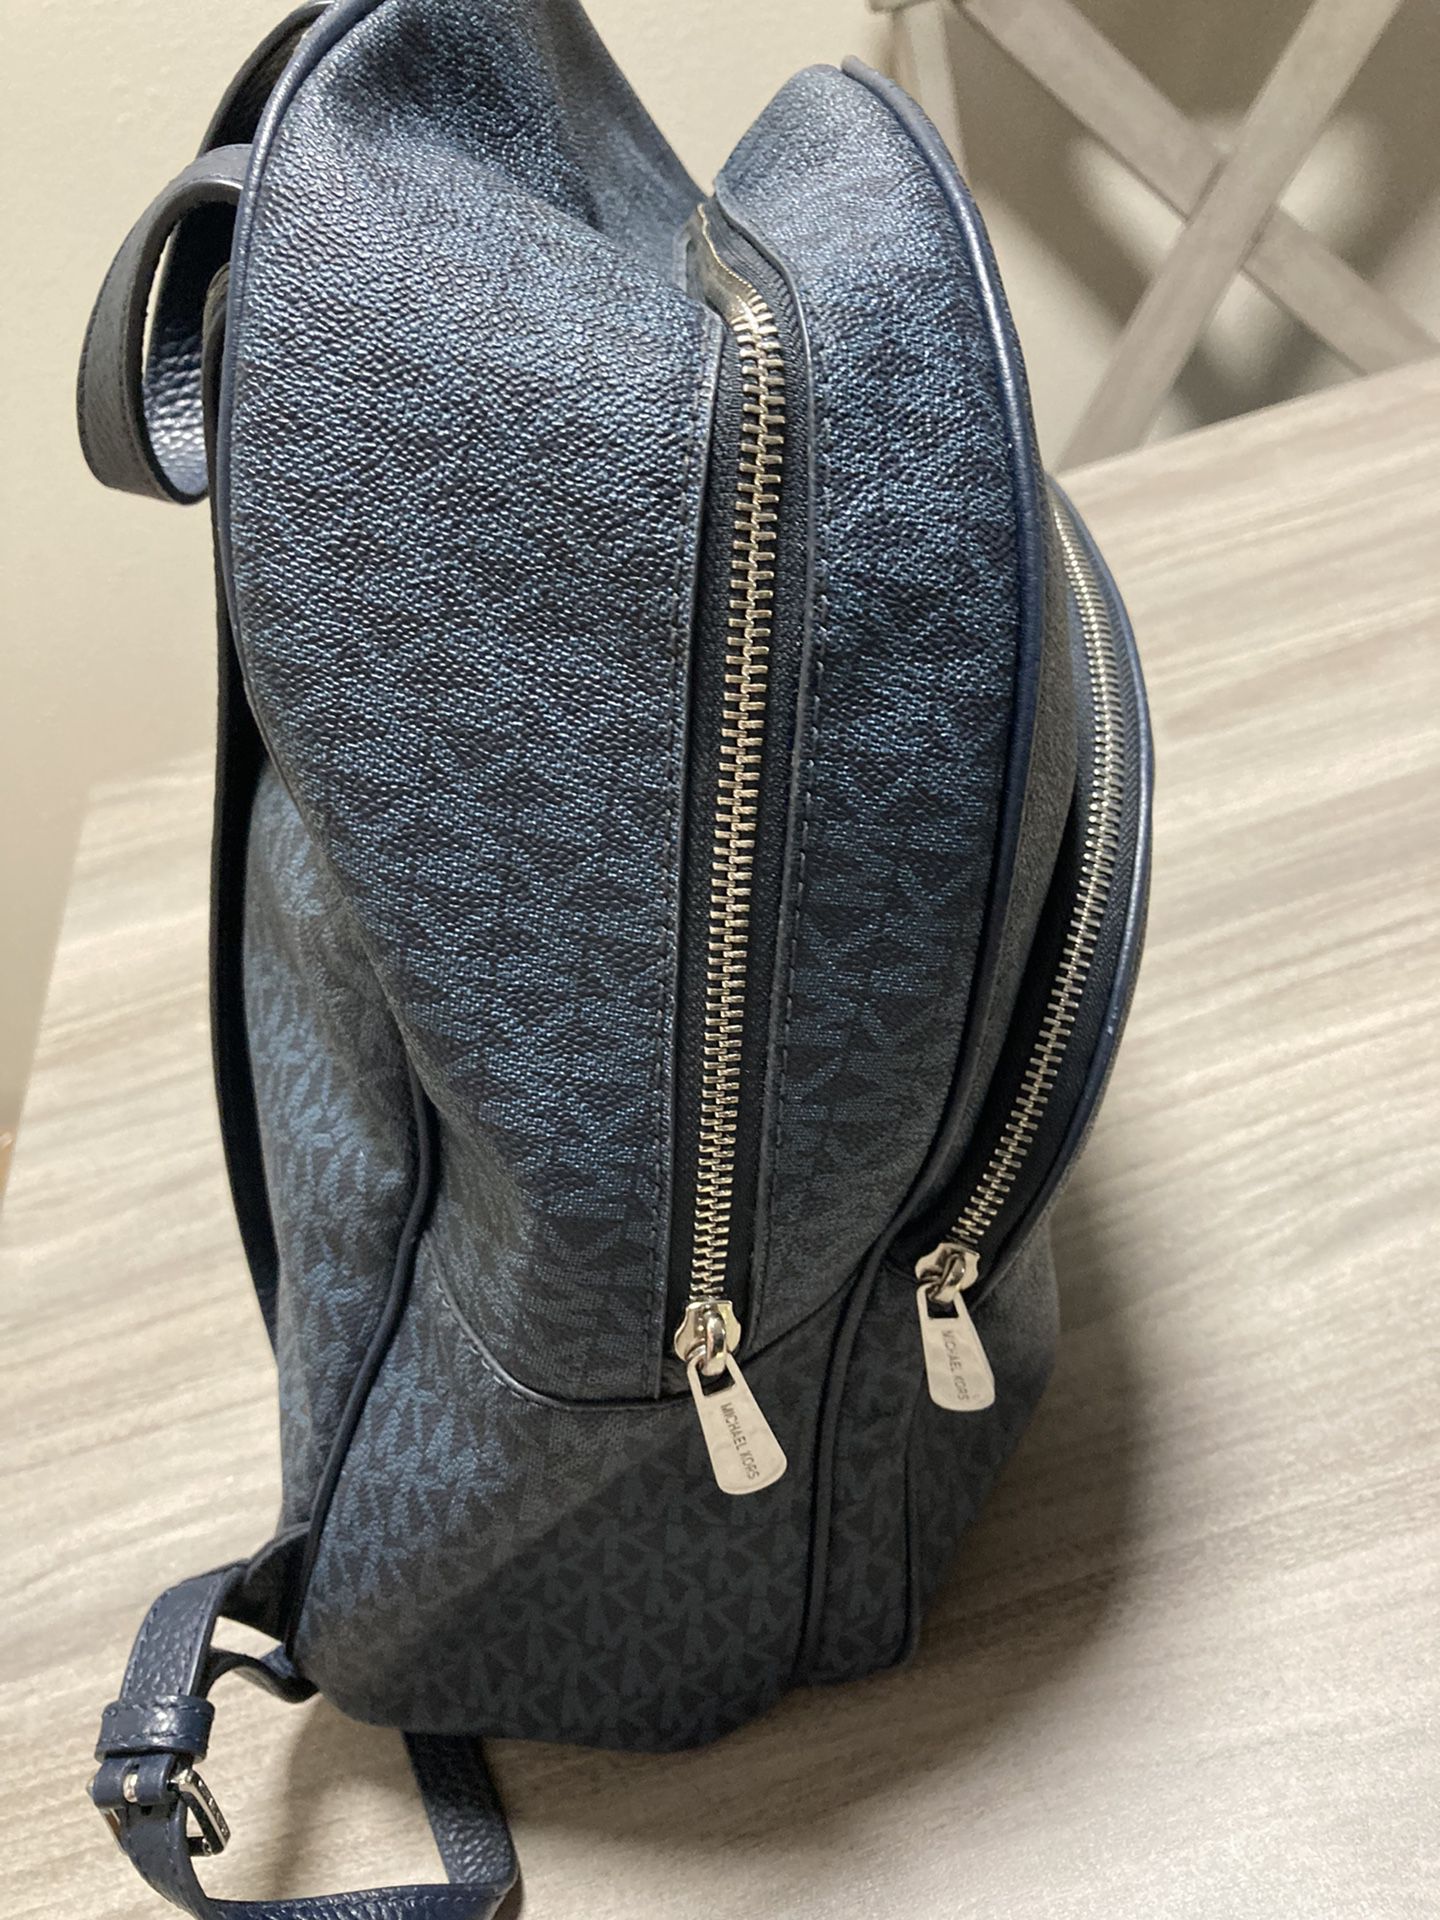 Michael Kors Backpack for Sale in South Gate, CA - OfferUp